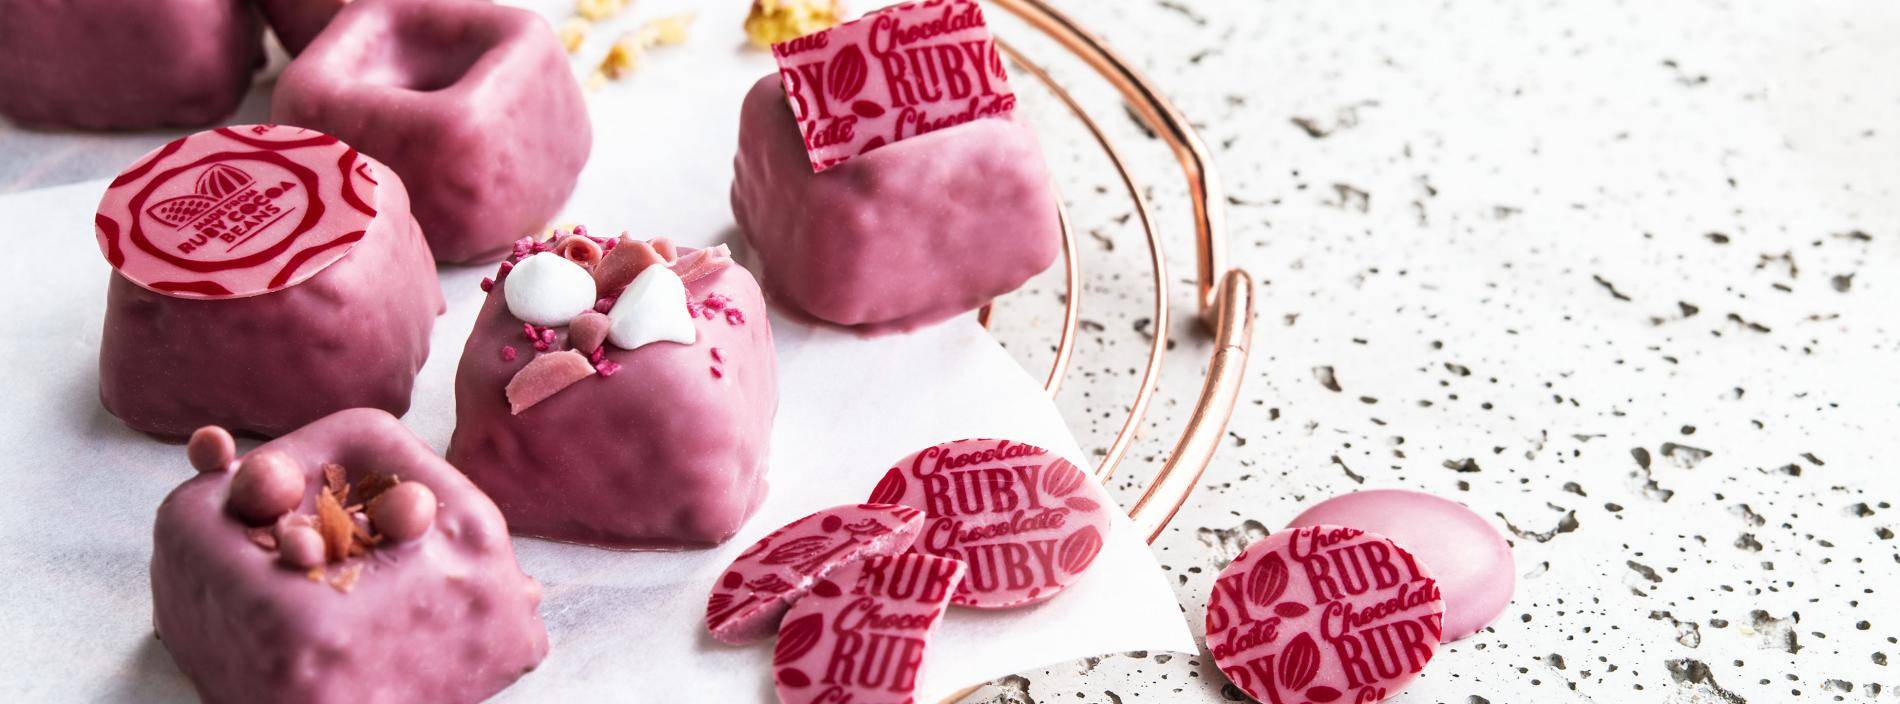 What claims can you make for ruby chocolate?